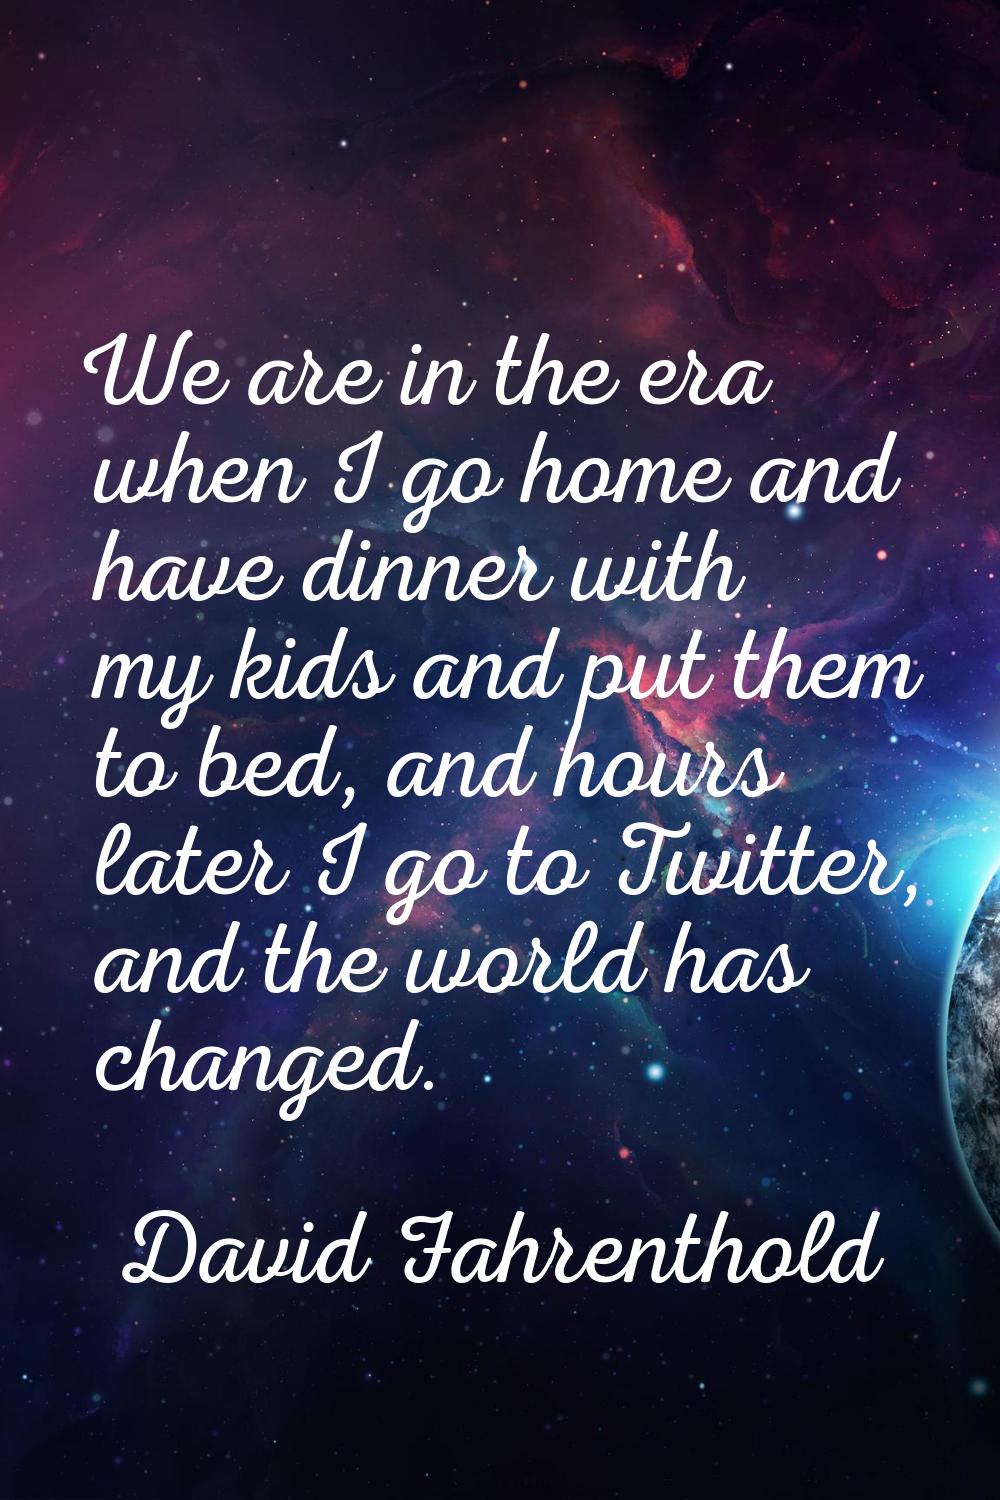 We are in the era when I go home and have dinner with my kids and put them to bed, and hours later 